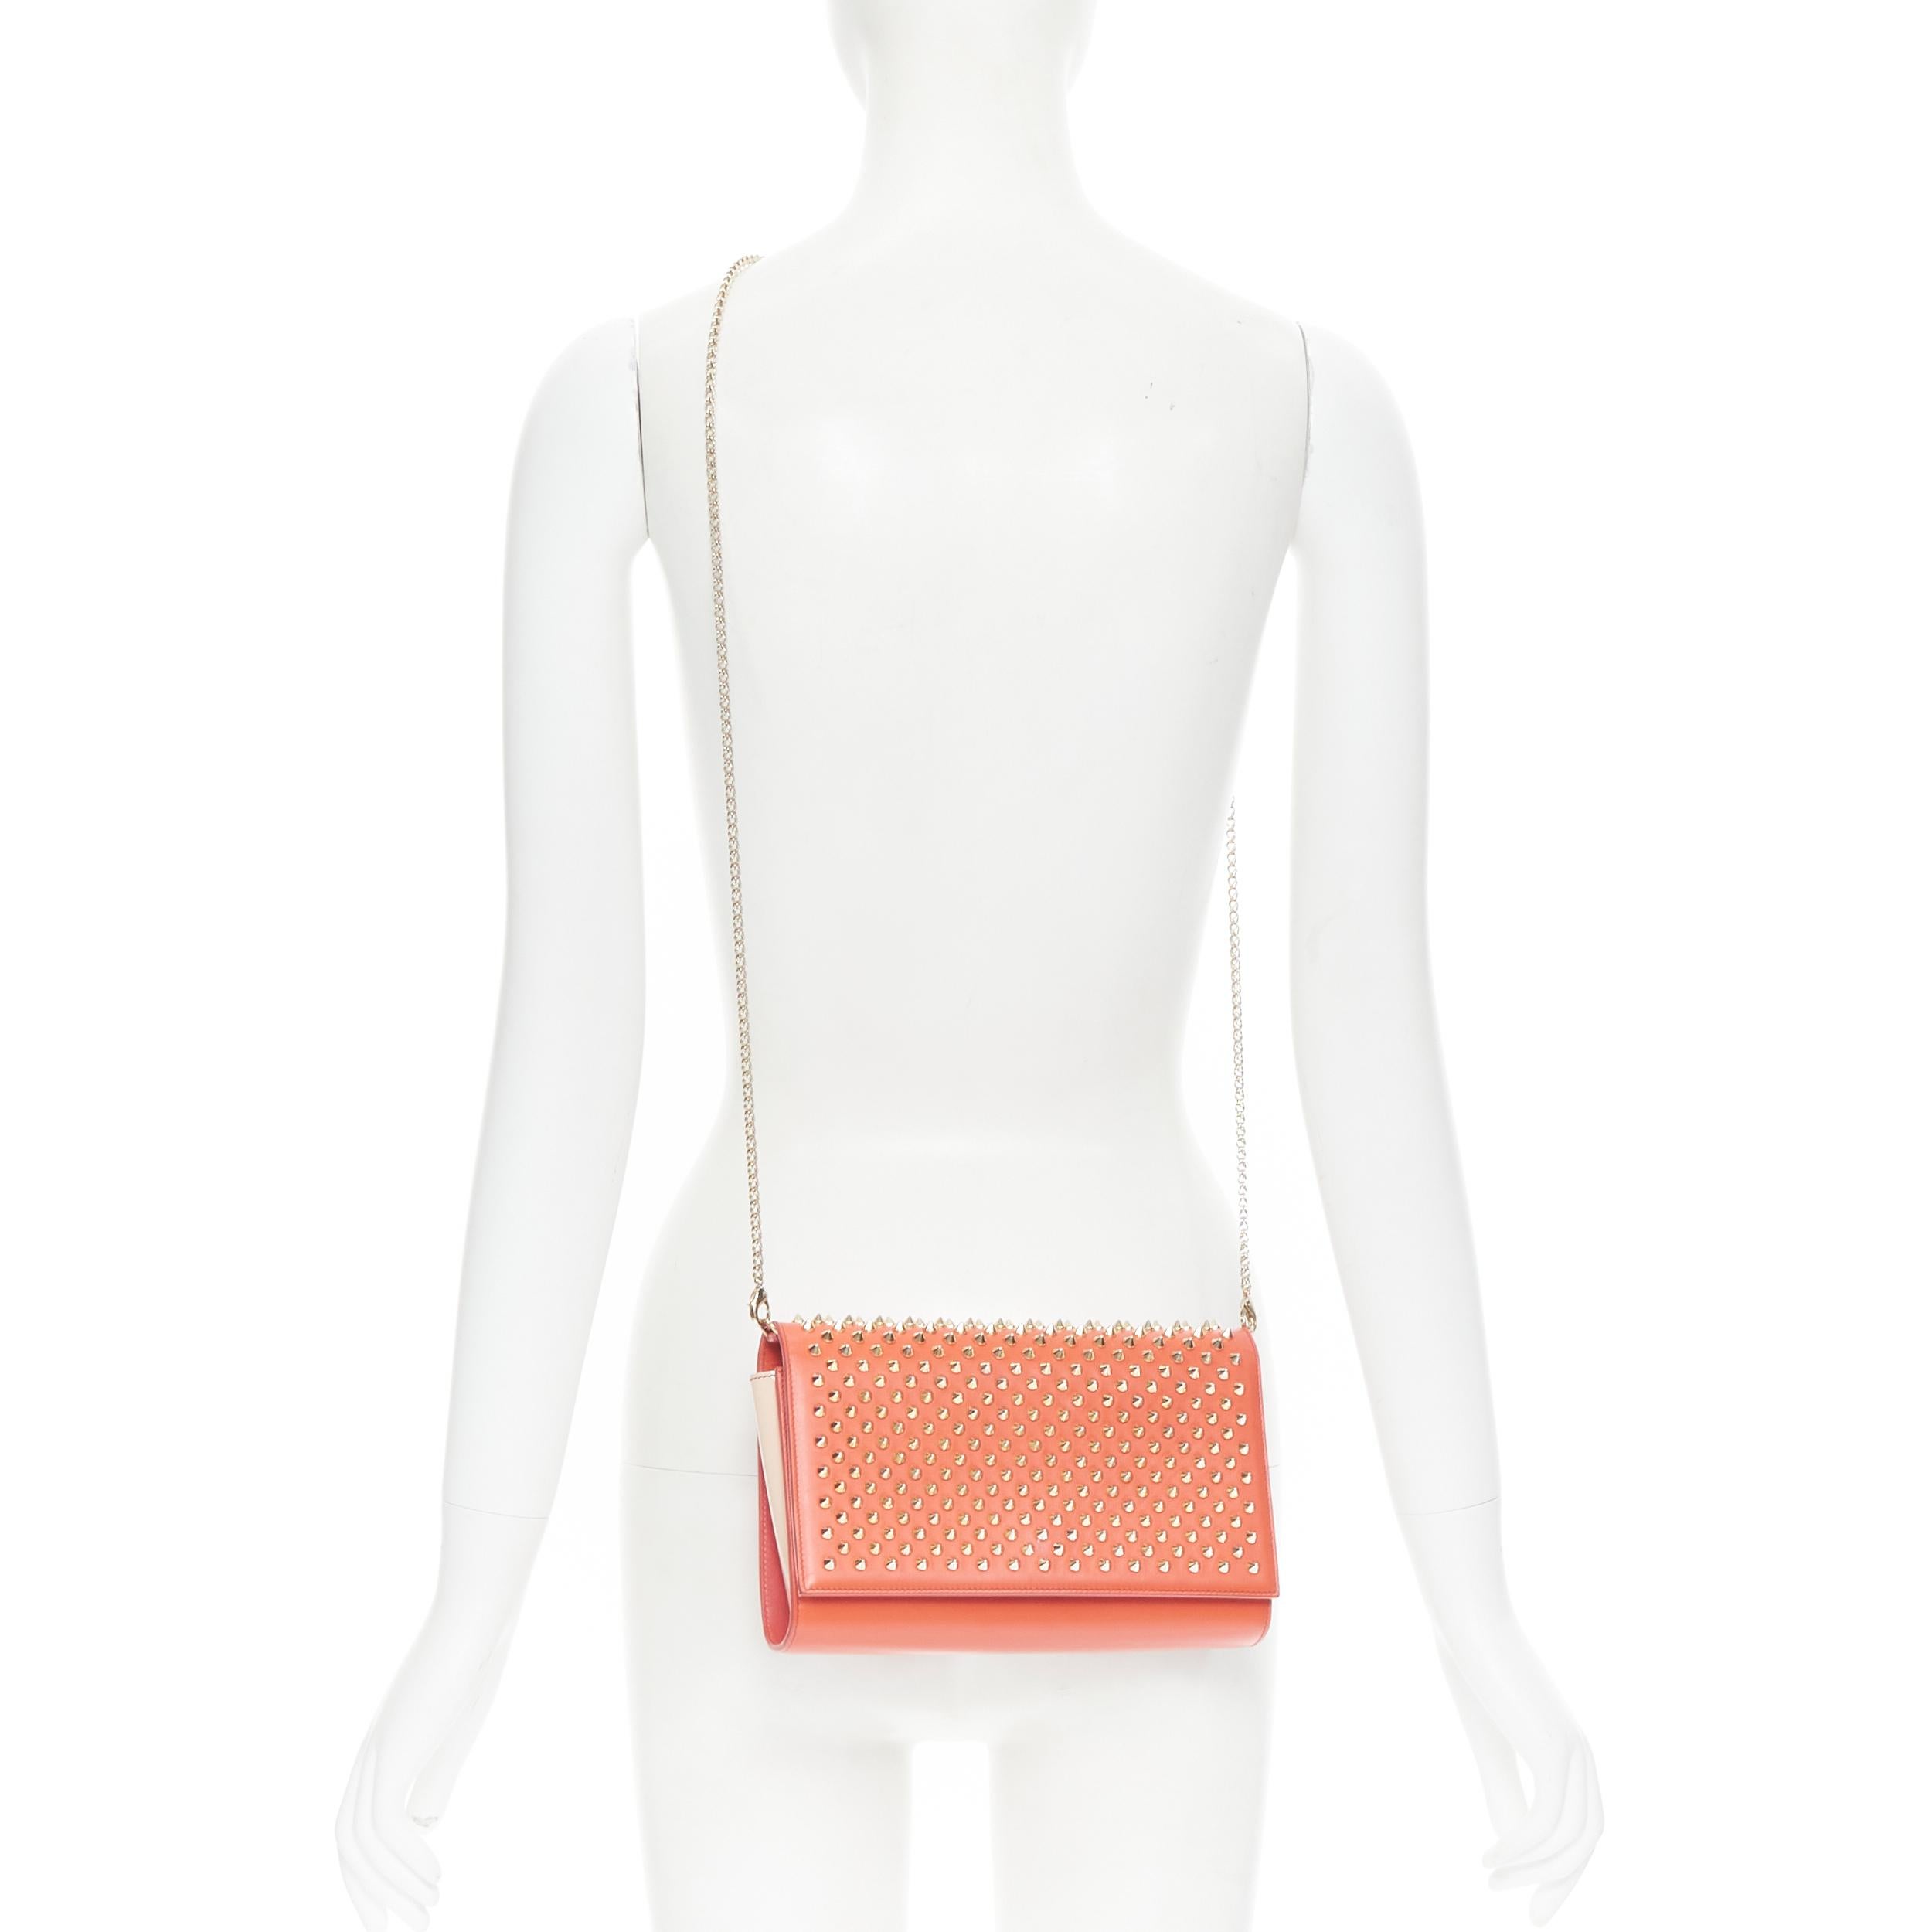 CHRISTIAN LOUBOUTIN Paloma red gold spike stud pink gusset shoulder chain bag 
Reference: TGAS/B01025 
Brand: Christian Louboutin 
Designer: Christian Louboutin 
Model: Paloma clutch 
Material: Leather 
Color: Red 
Pattern: Solid 
Closure: Button